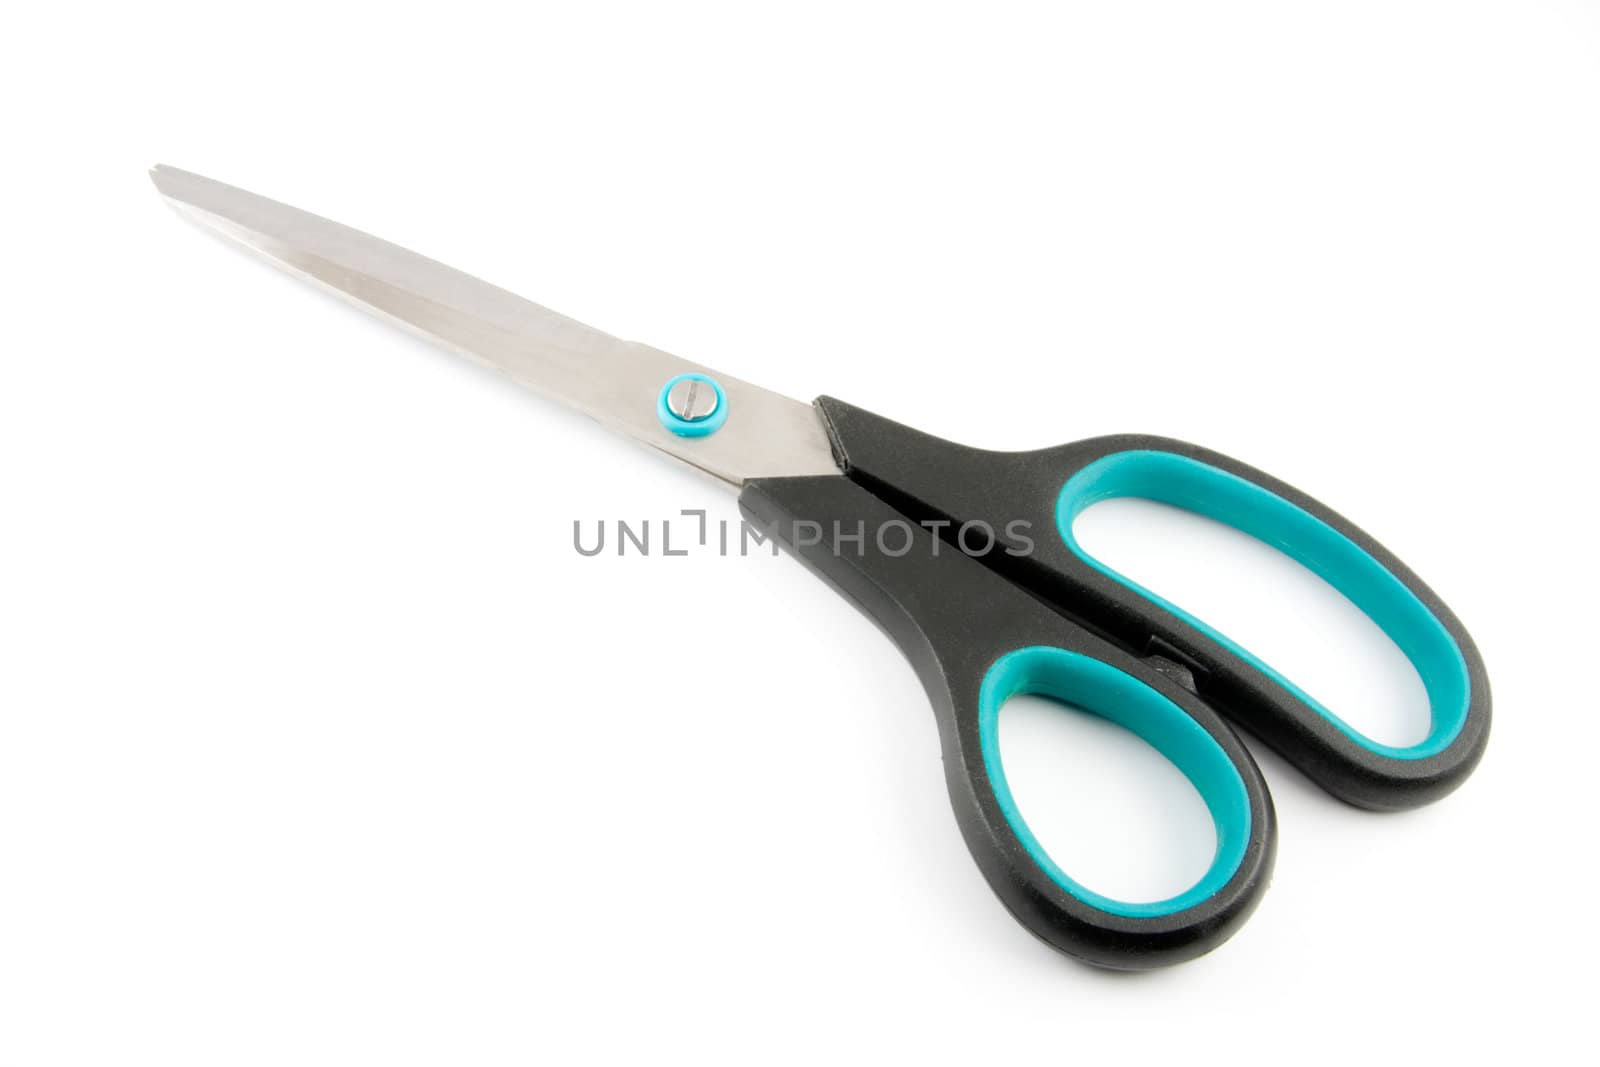 Closed Scissors isolated on a white background